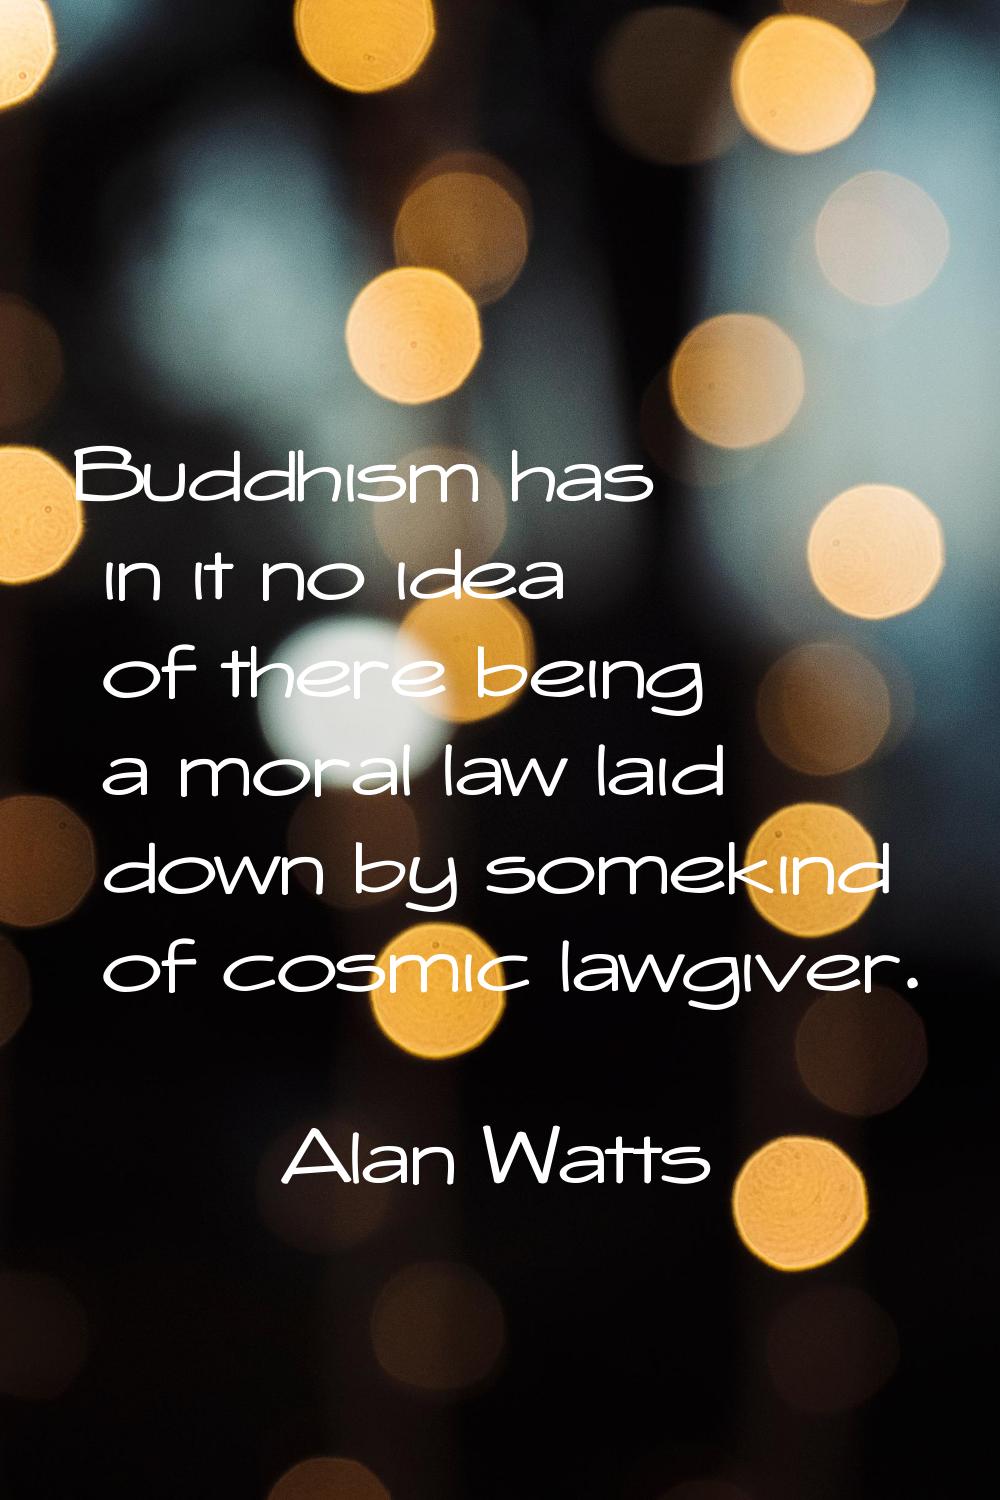 Buddhism has in it no idea of there being a moral law laid down by somekind of cosmic lawgiver.